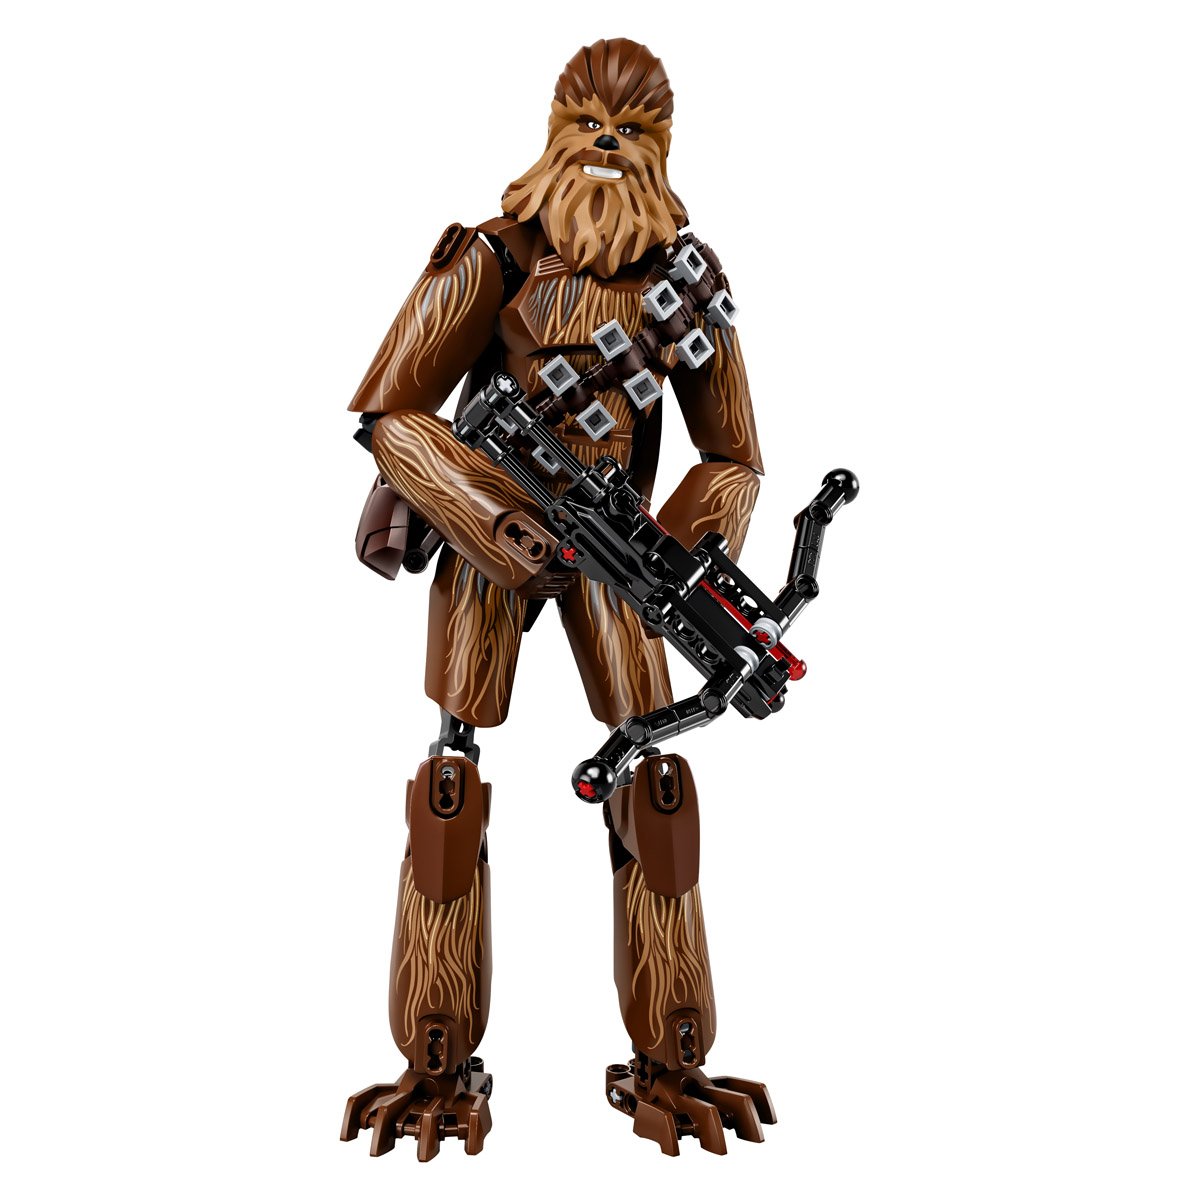 Star Wars - Constraction Chewbacca Lego